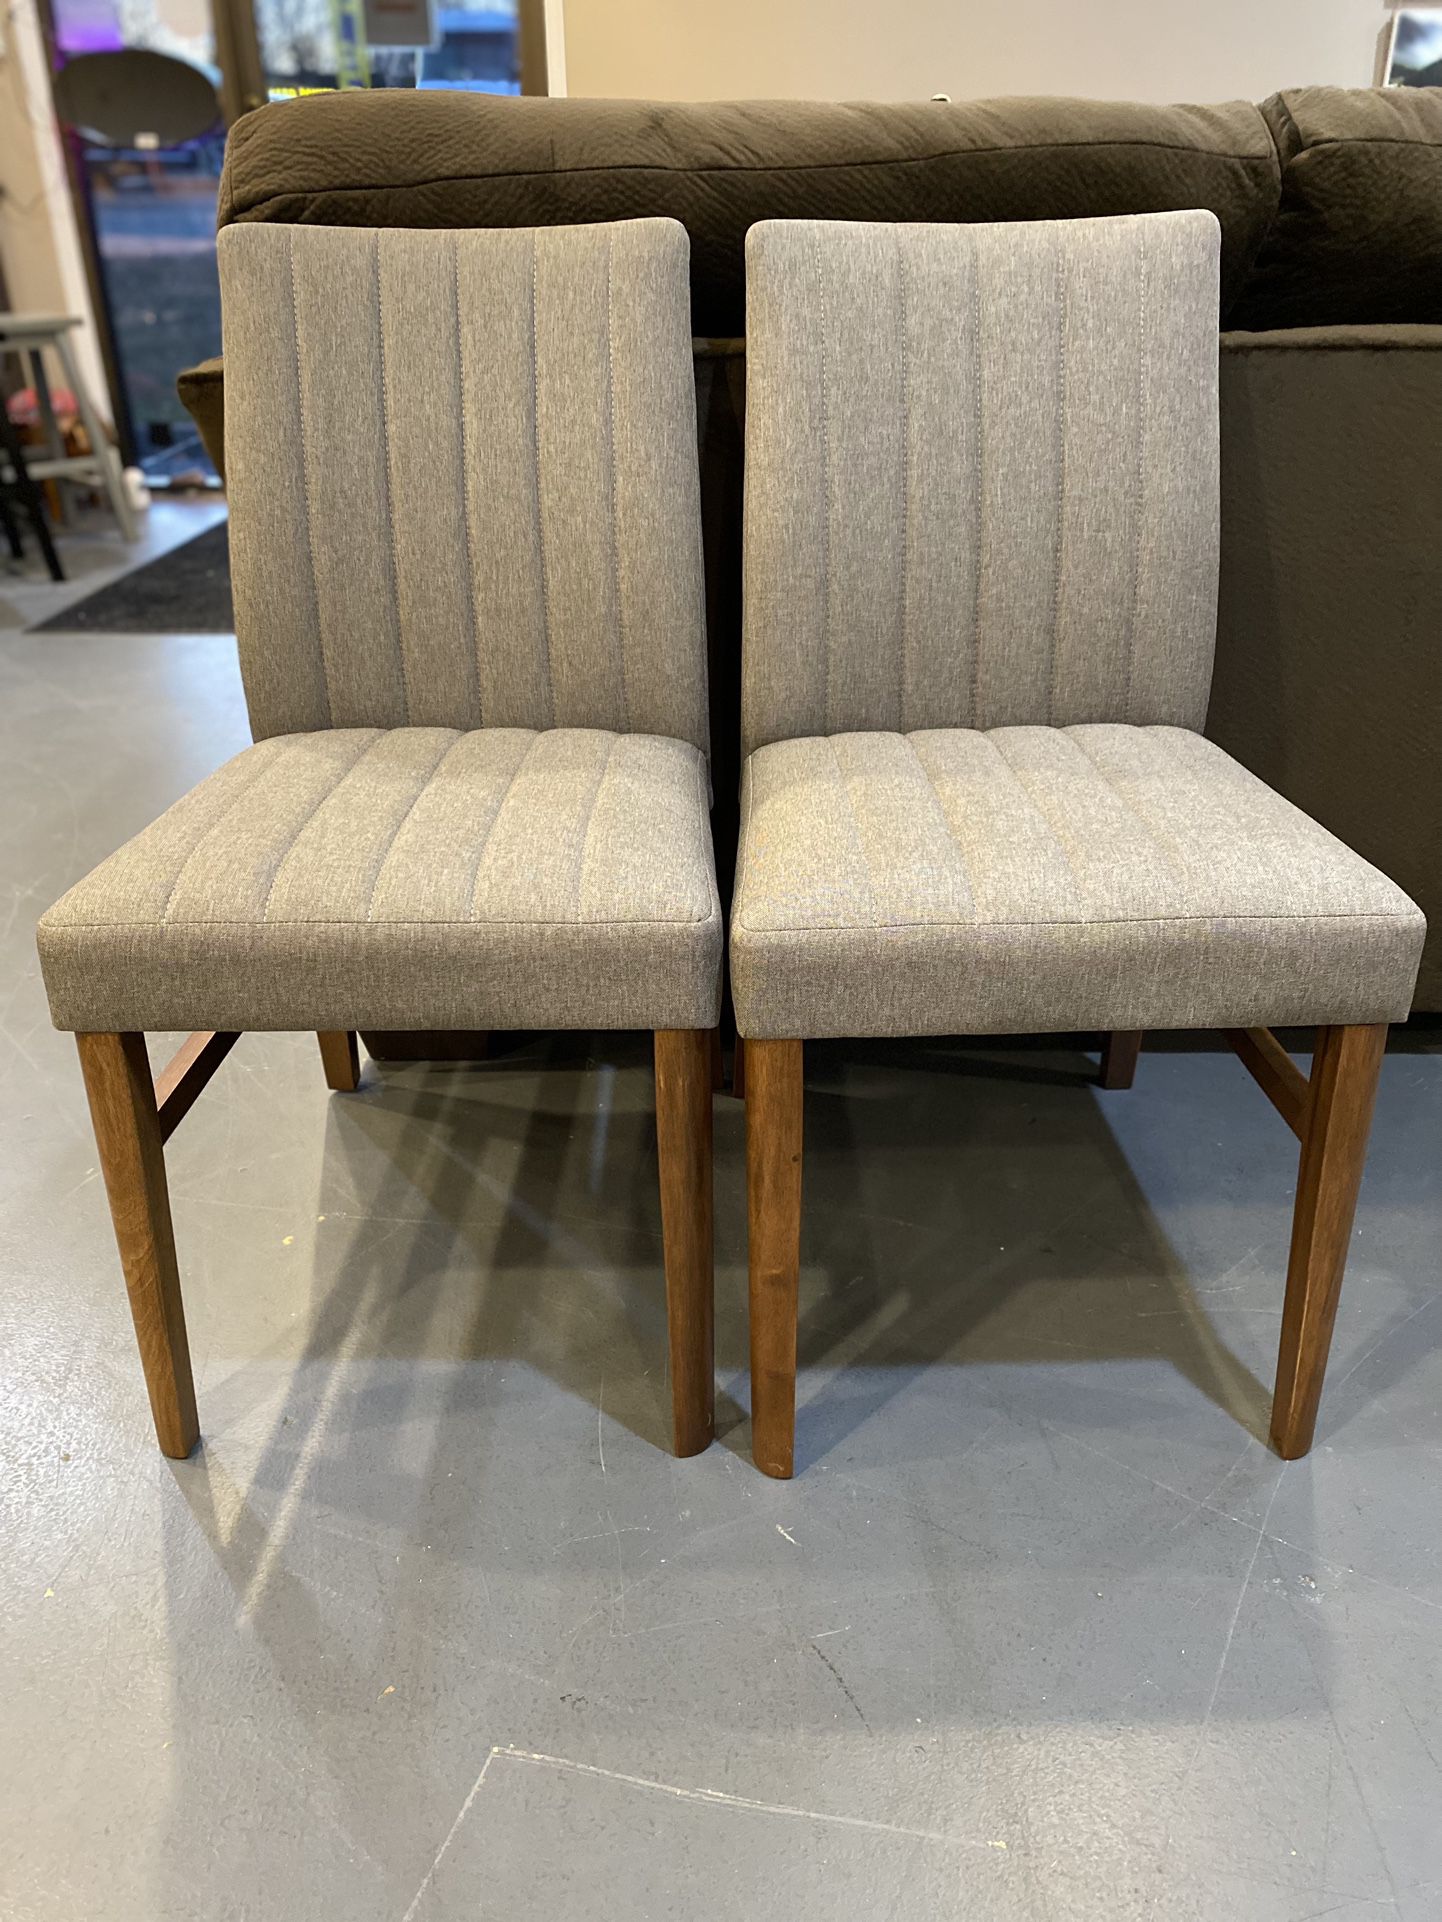 New Dining Chair Set (2)